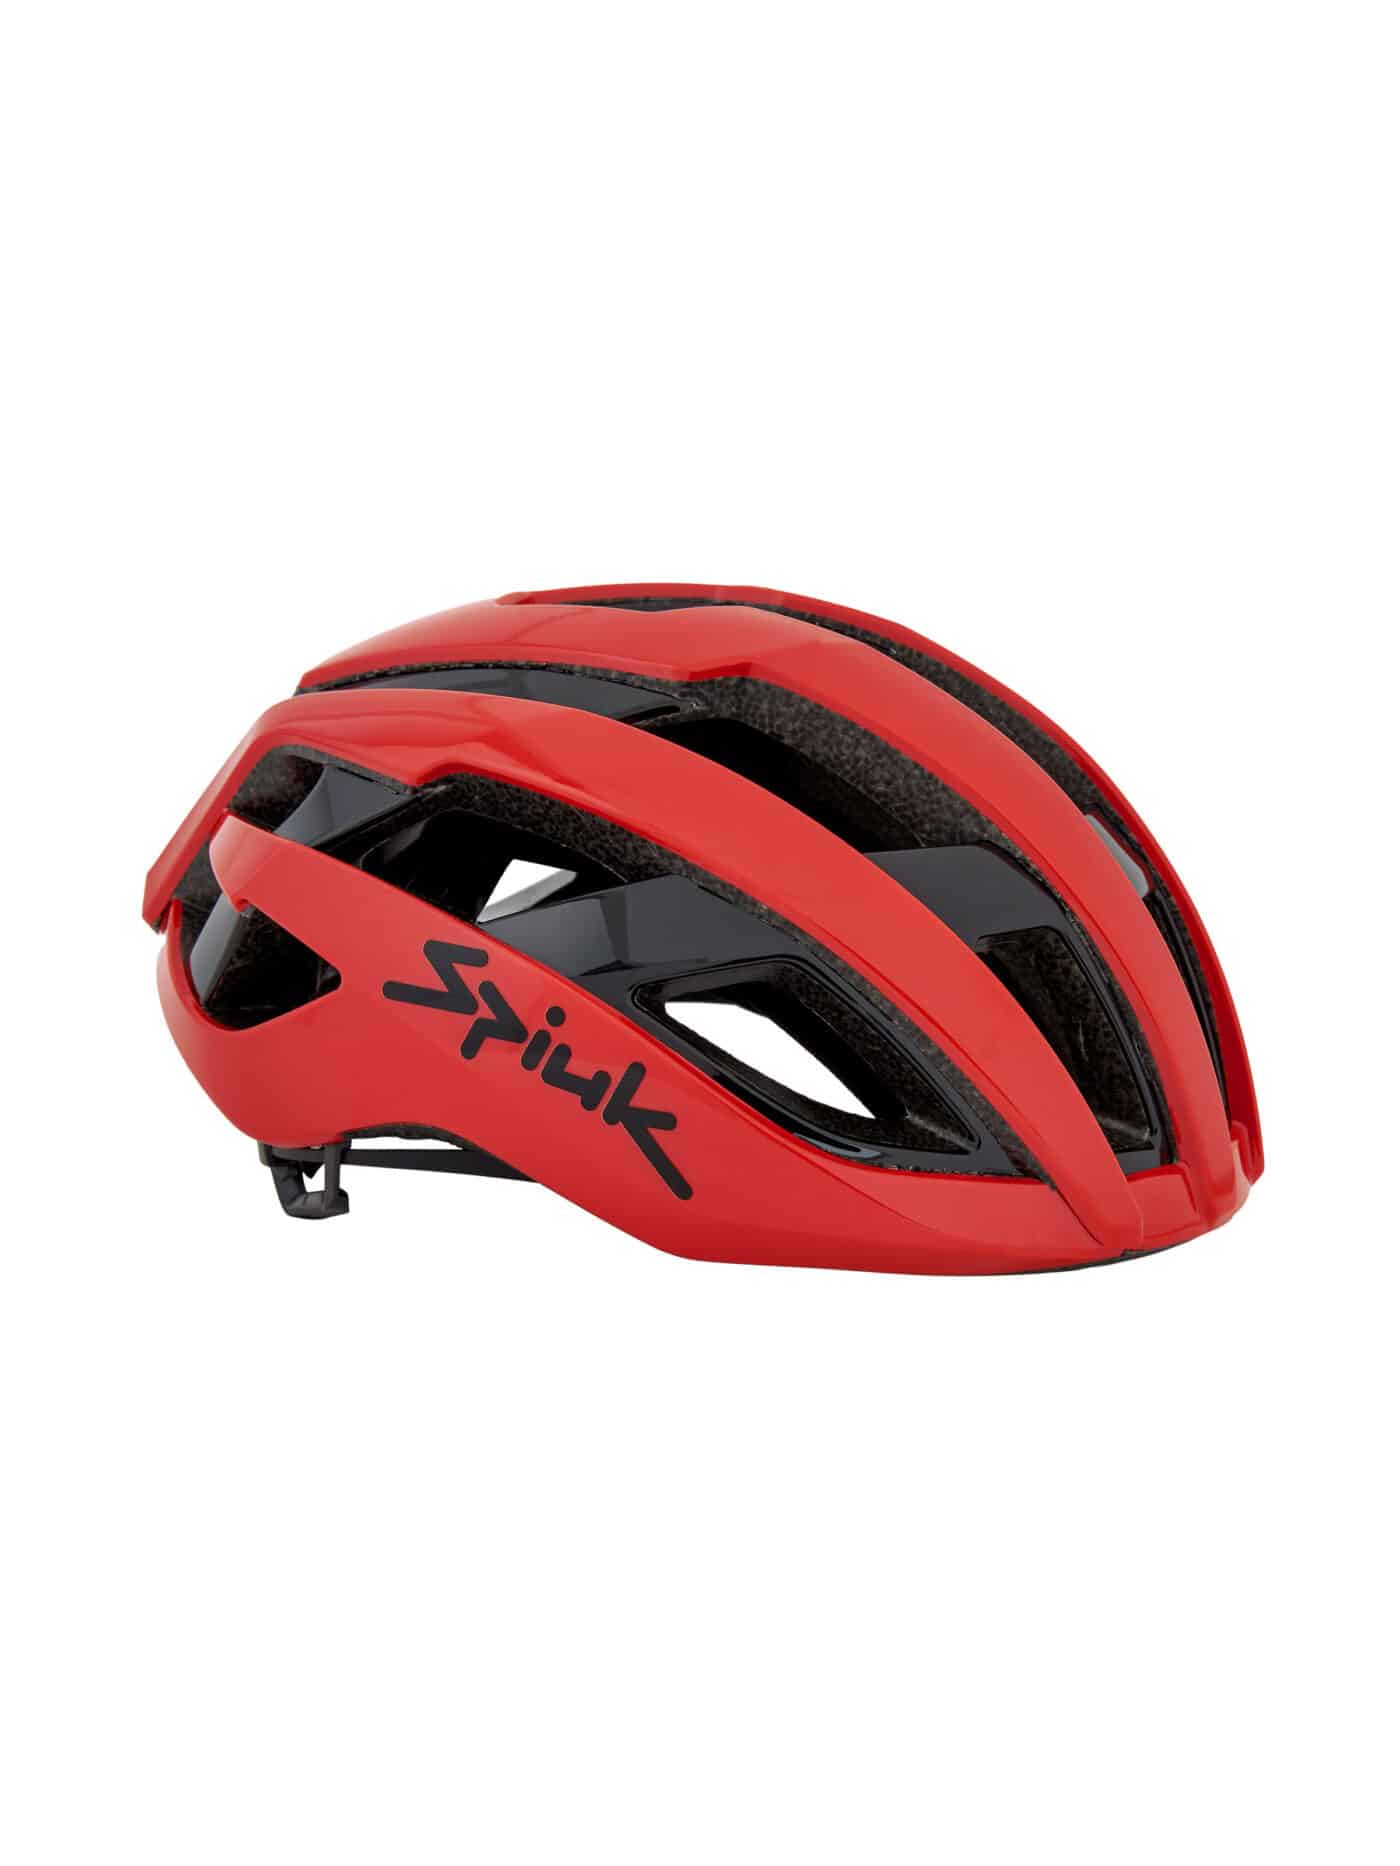 Casque velo route spiuk domo rouge